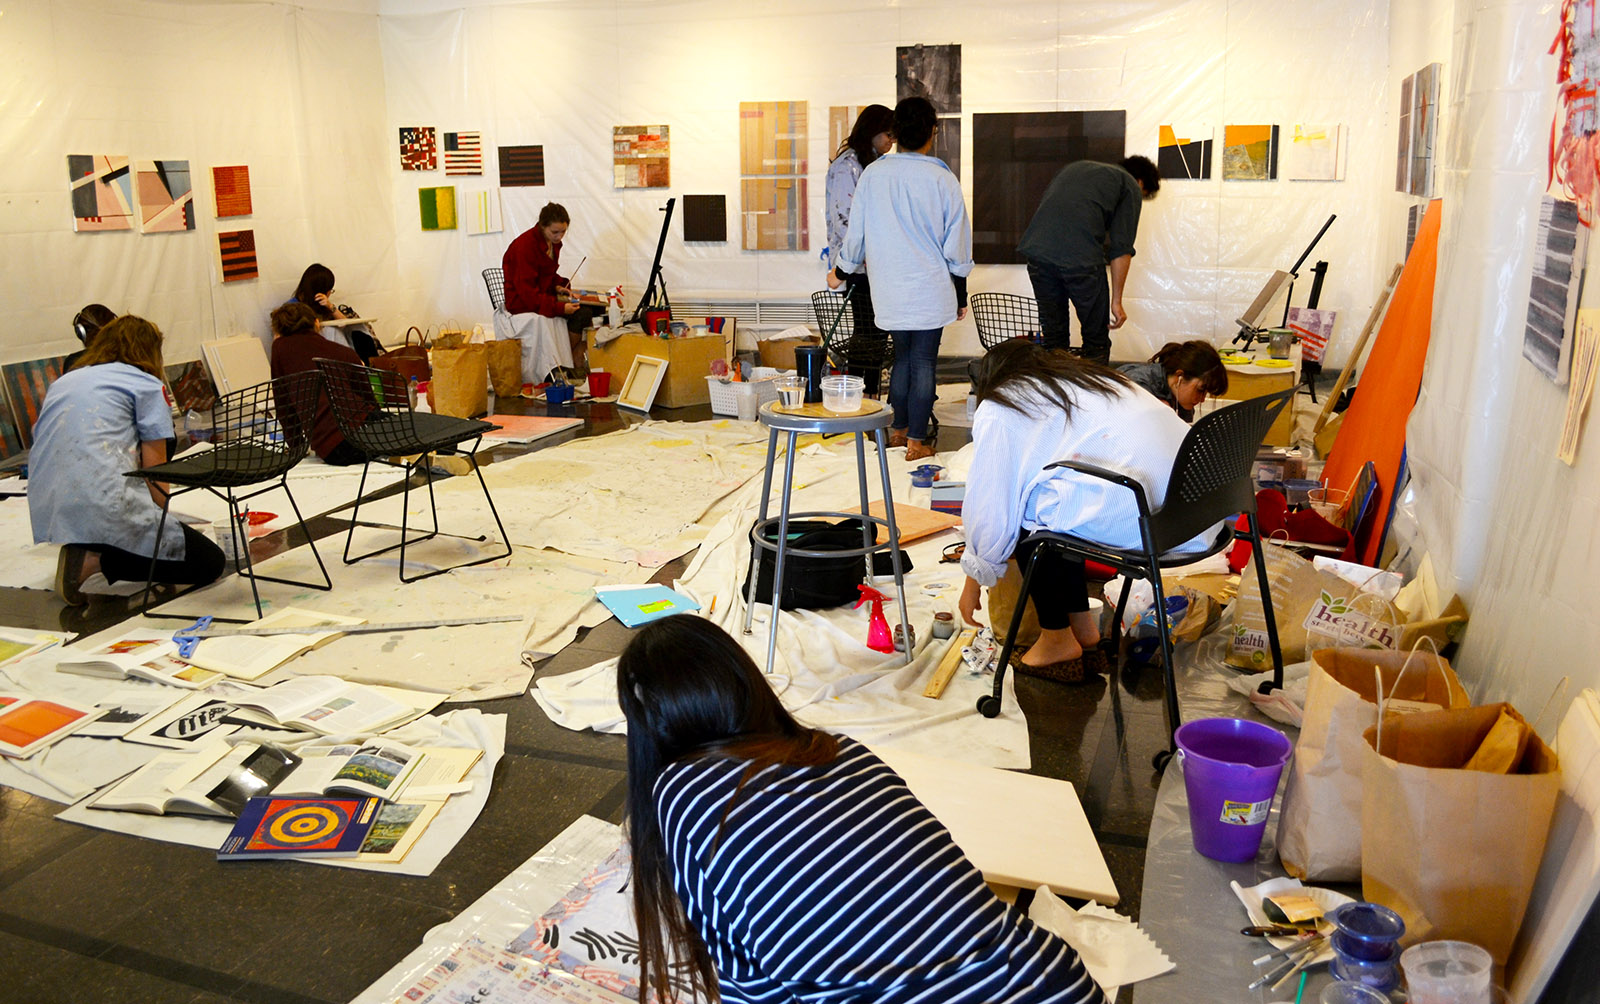 Students sitting on the ground painting